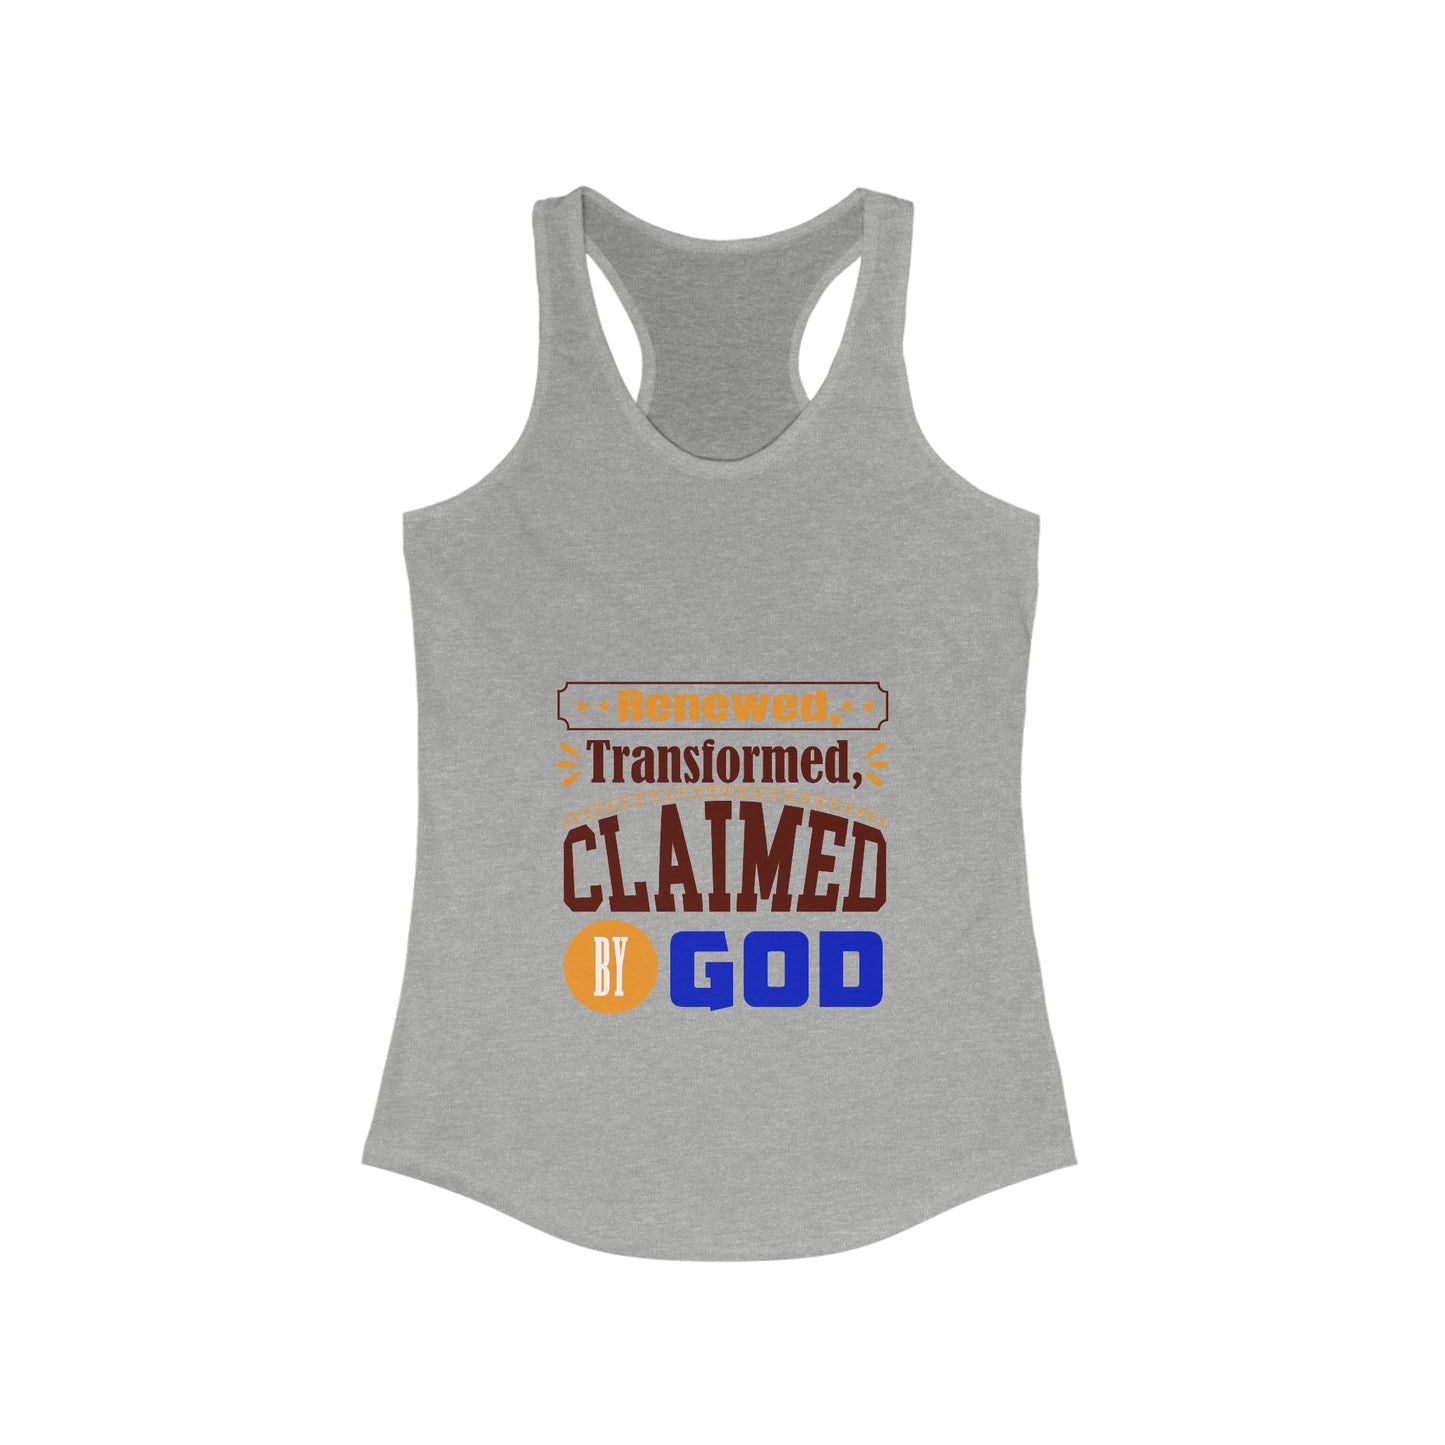 Renewed, Transformed, Claimed By God Slim Fit Tank-top